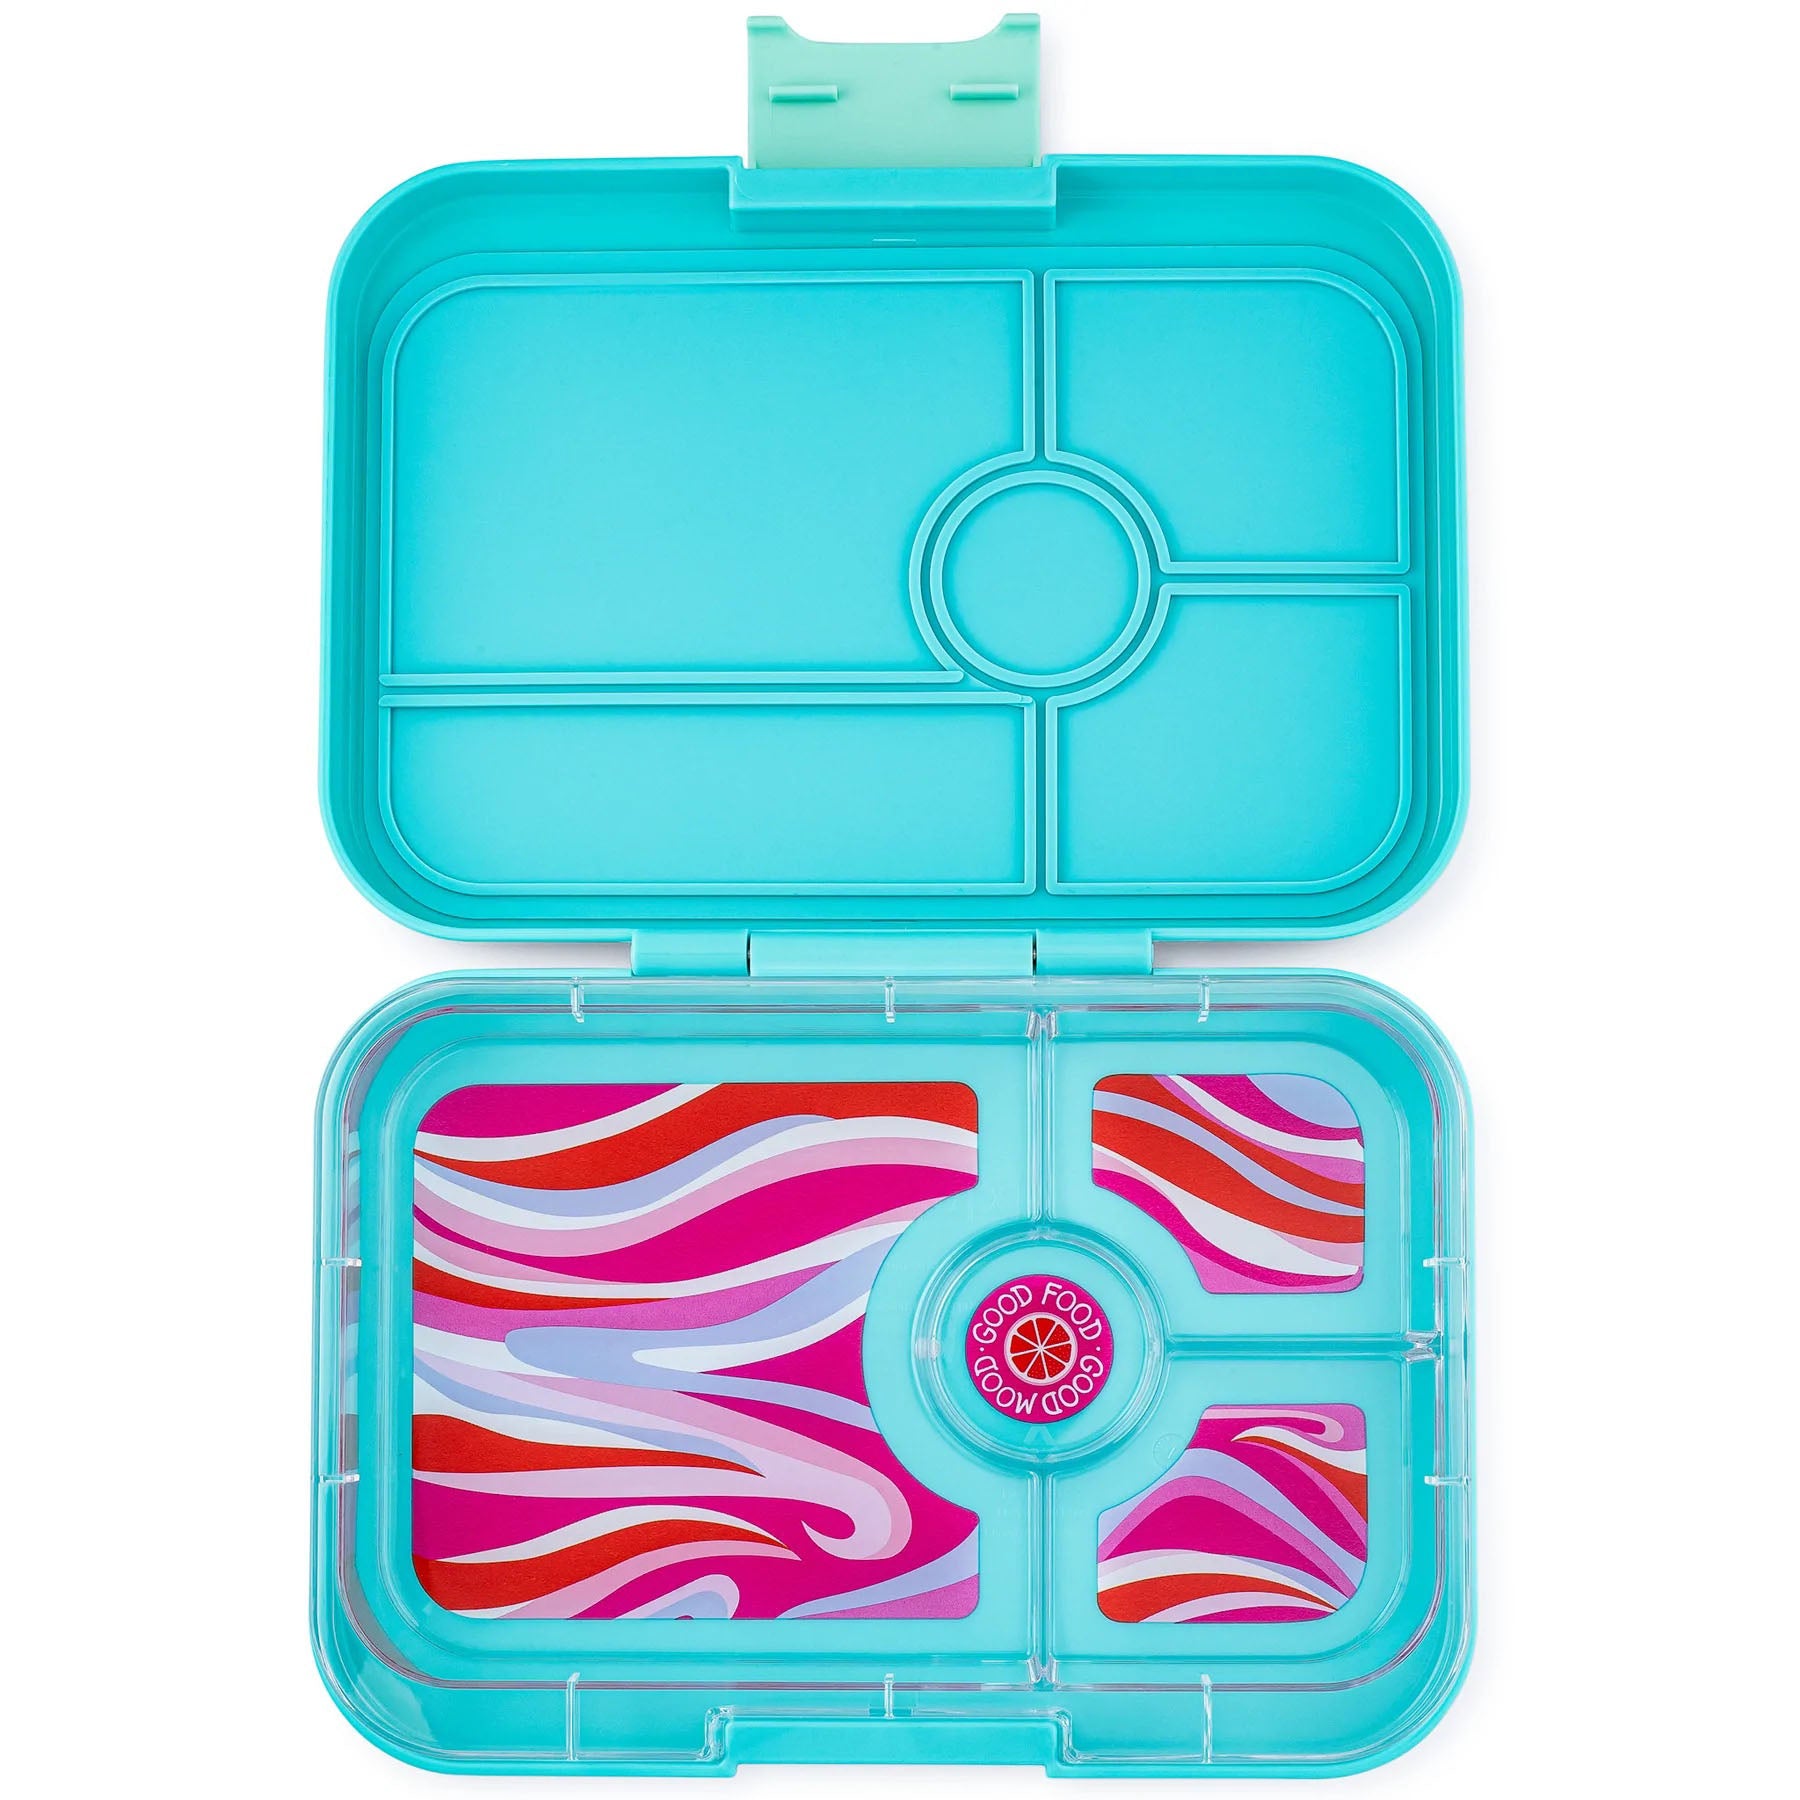 Yumbox Tapas: Antibes Blue (Groovy Tray, 4 Compartments)